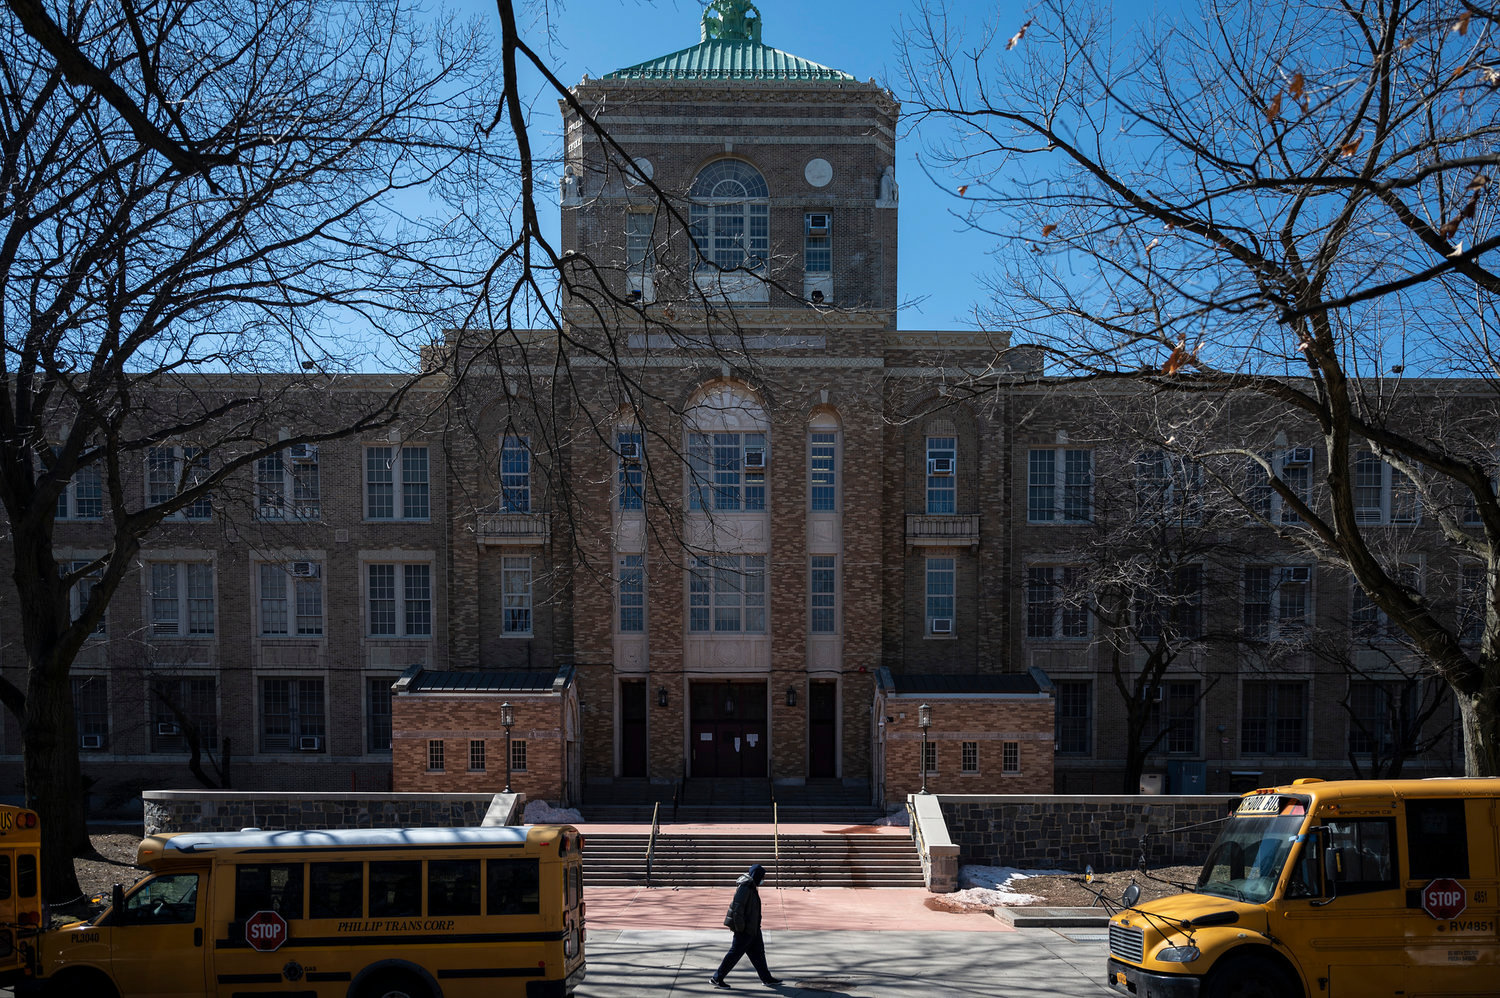 DeWitt Clinton High School explores famous icon legacies and enjoys sharing its stories with students — including Stan Lee, the late comic book writer, editor, publisher and producer. Lee’s notable work at Marvel included the co-creation of superhero icons like Spider-Man and Iron Man.